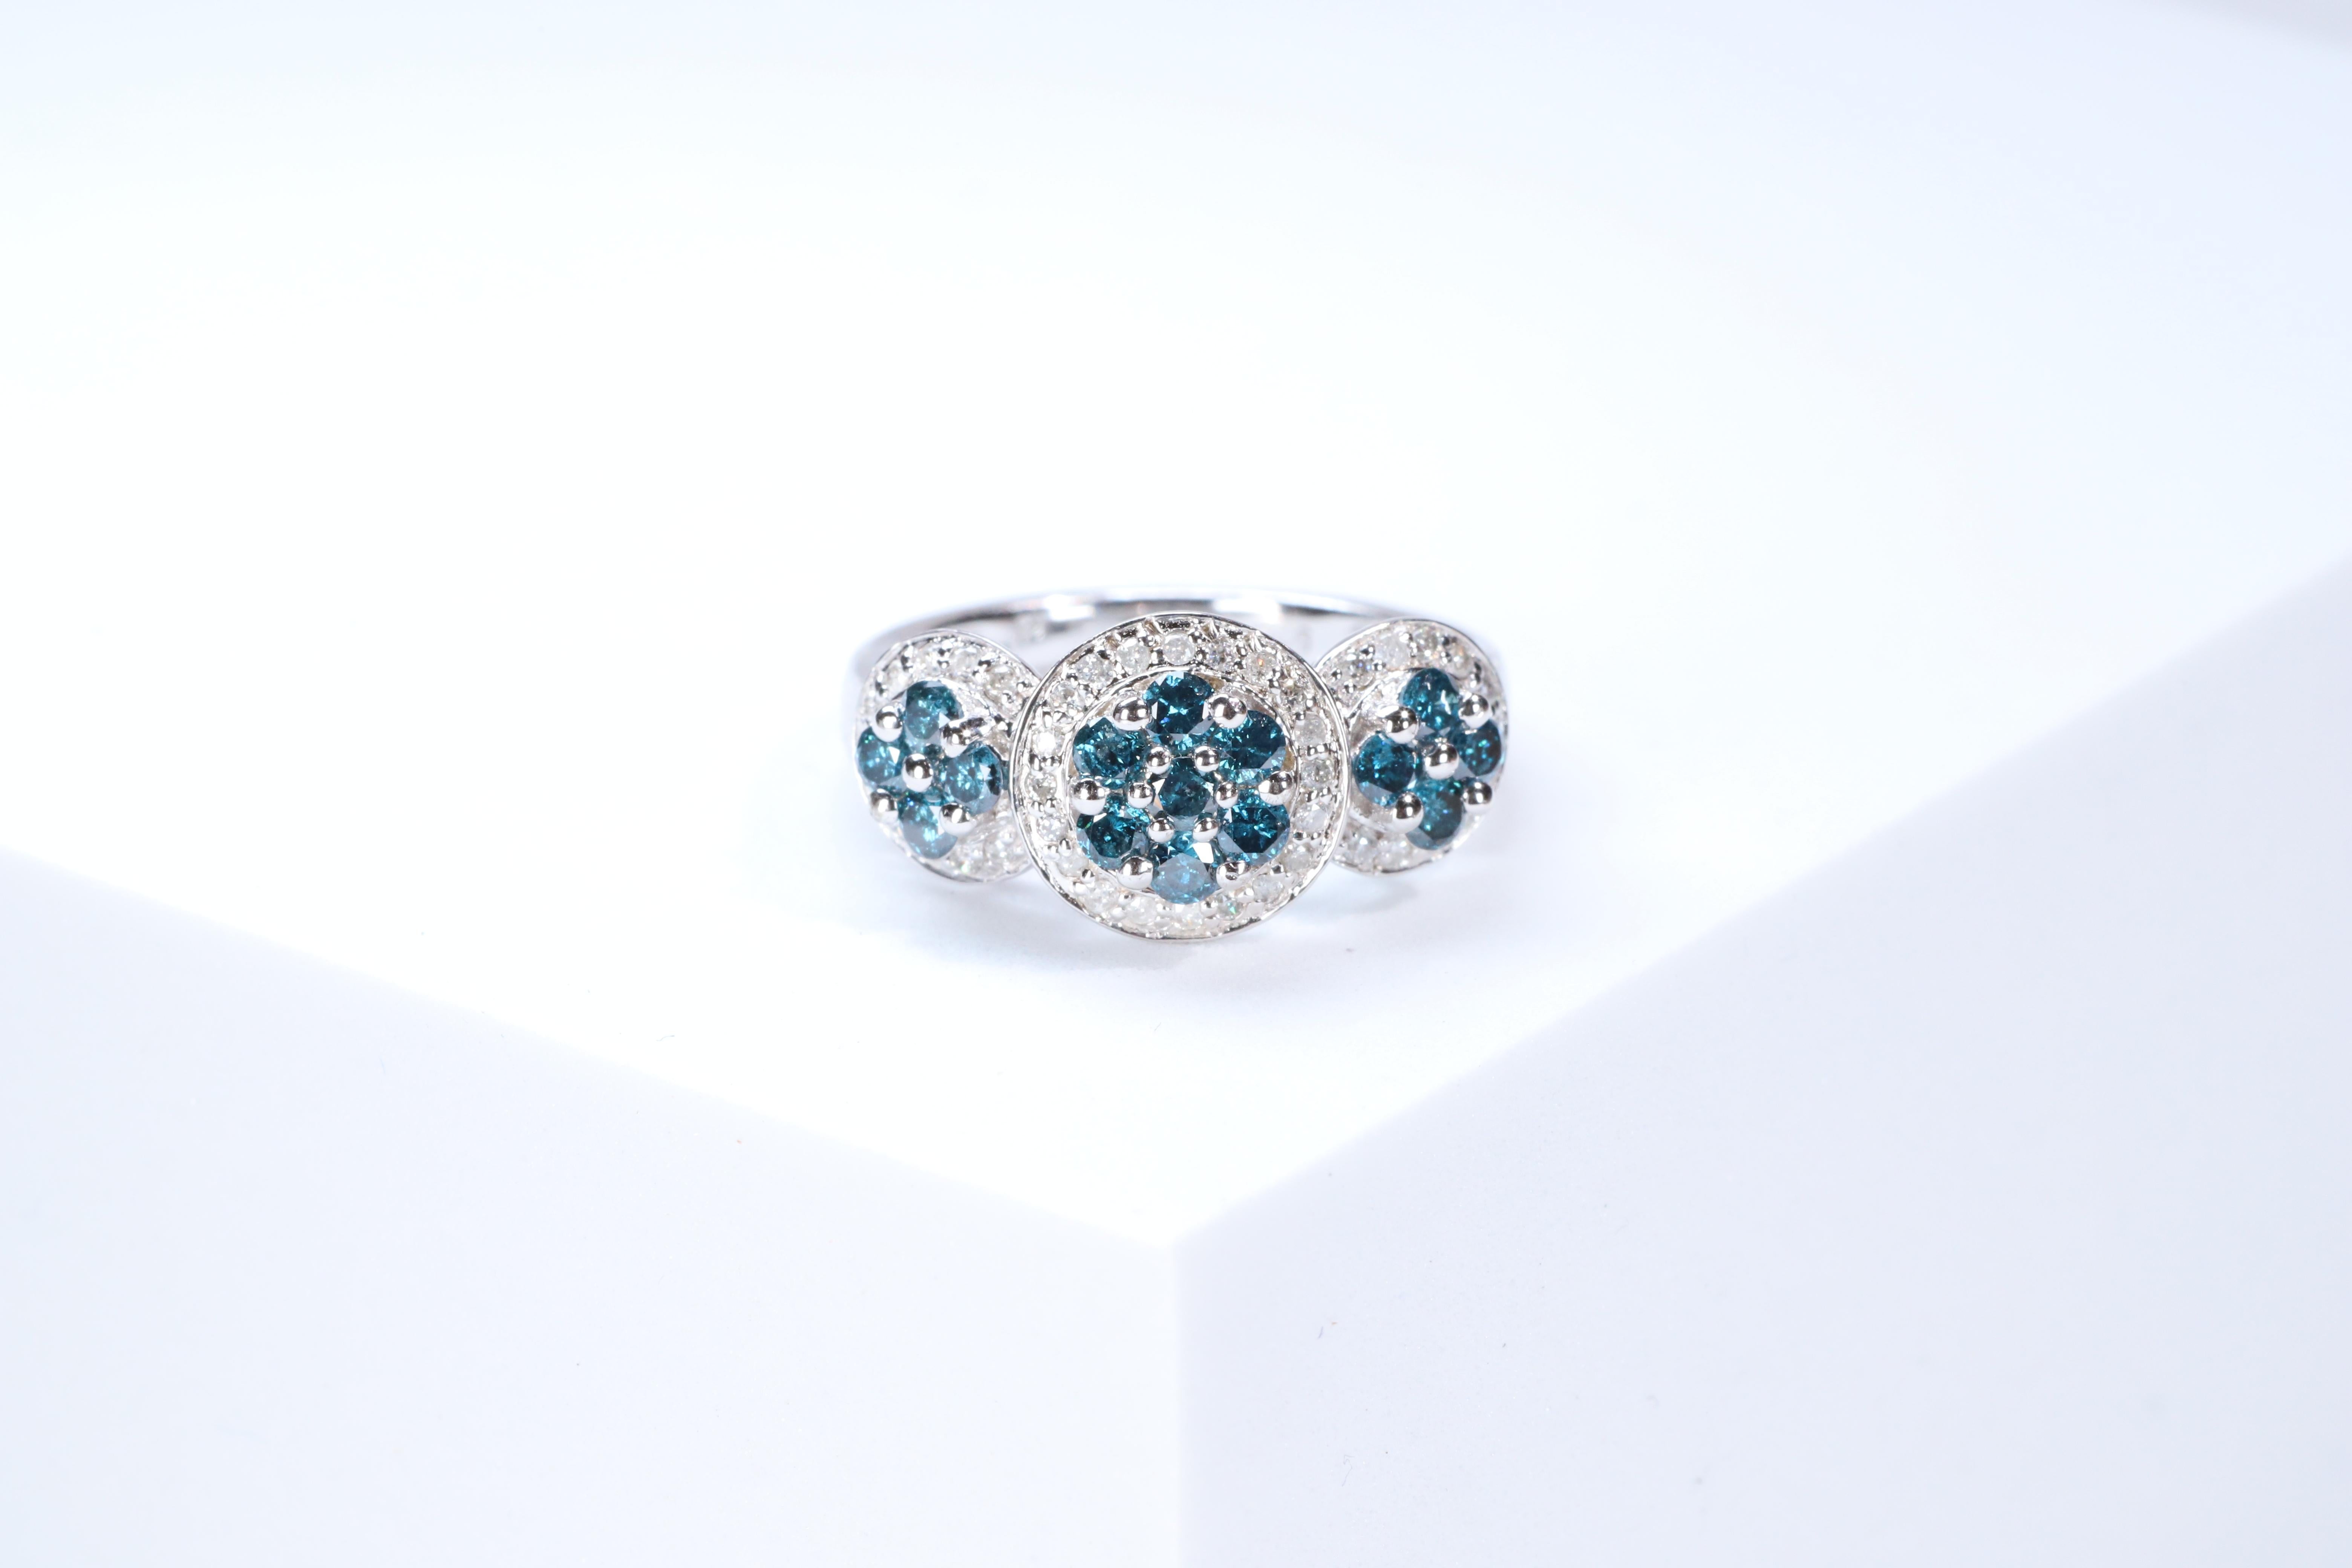 Stunning, timeless and classy eternity Unique Ring. Decorate yourself in luxury with this Gin & Grace Ring. The 925 Sterling Silver jewelry boasts with Natural Round-cut white Diamond (42 Pcs) 0.23 Carat, Round-cut Blue Diamond (15 pcs) 0.73 carat